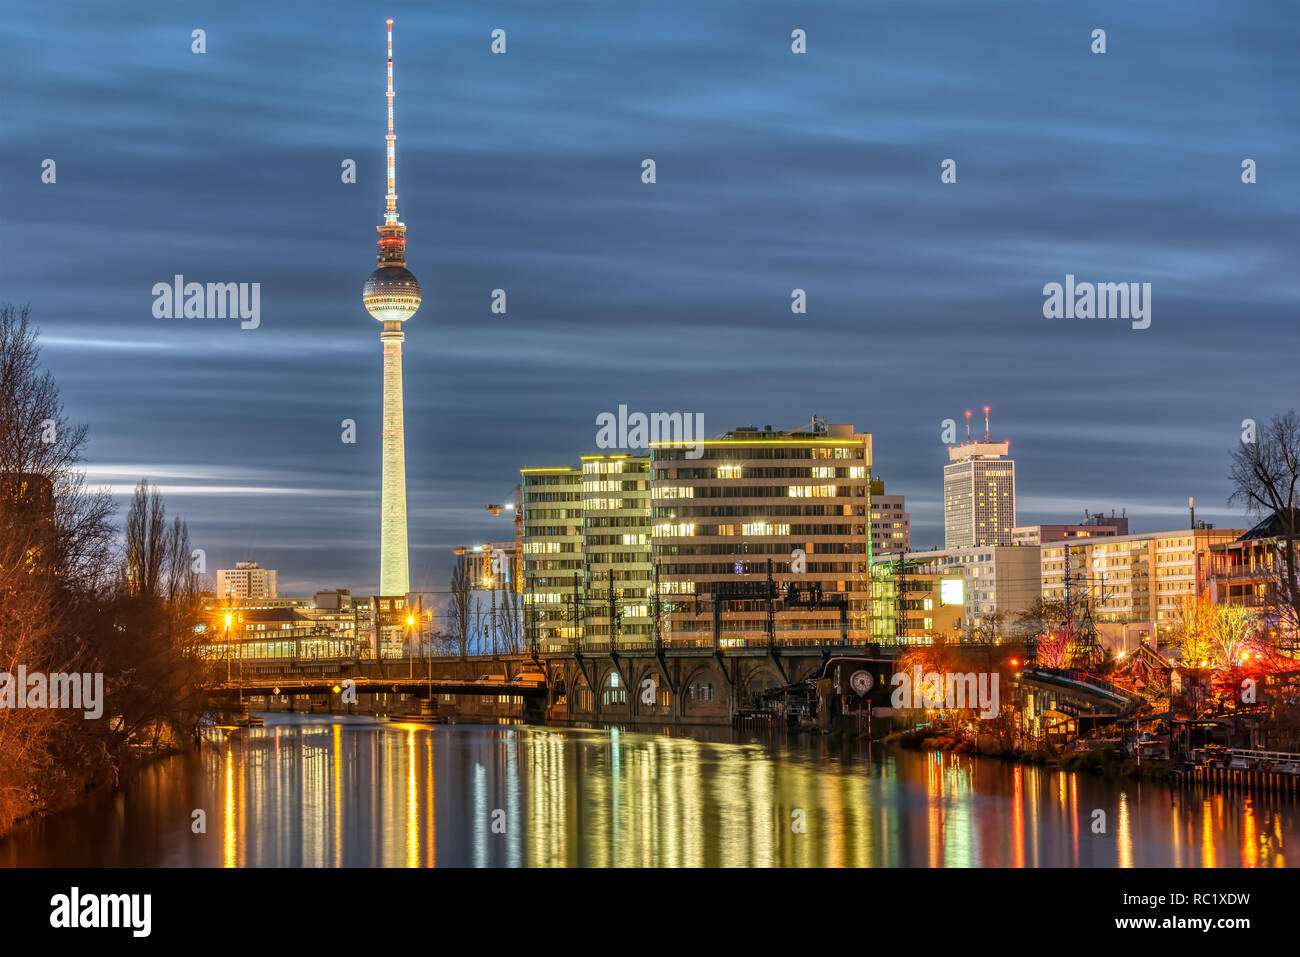 The river Spree, the famous Television Tower and some office buildings in Berlin at night Stock Photo